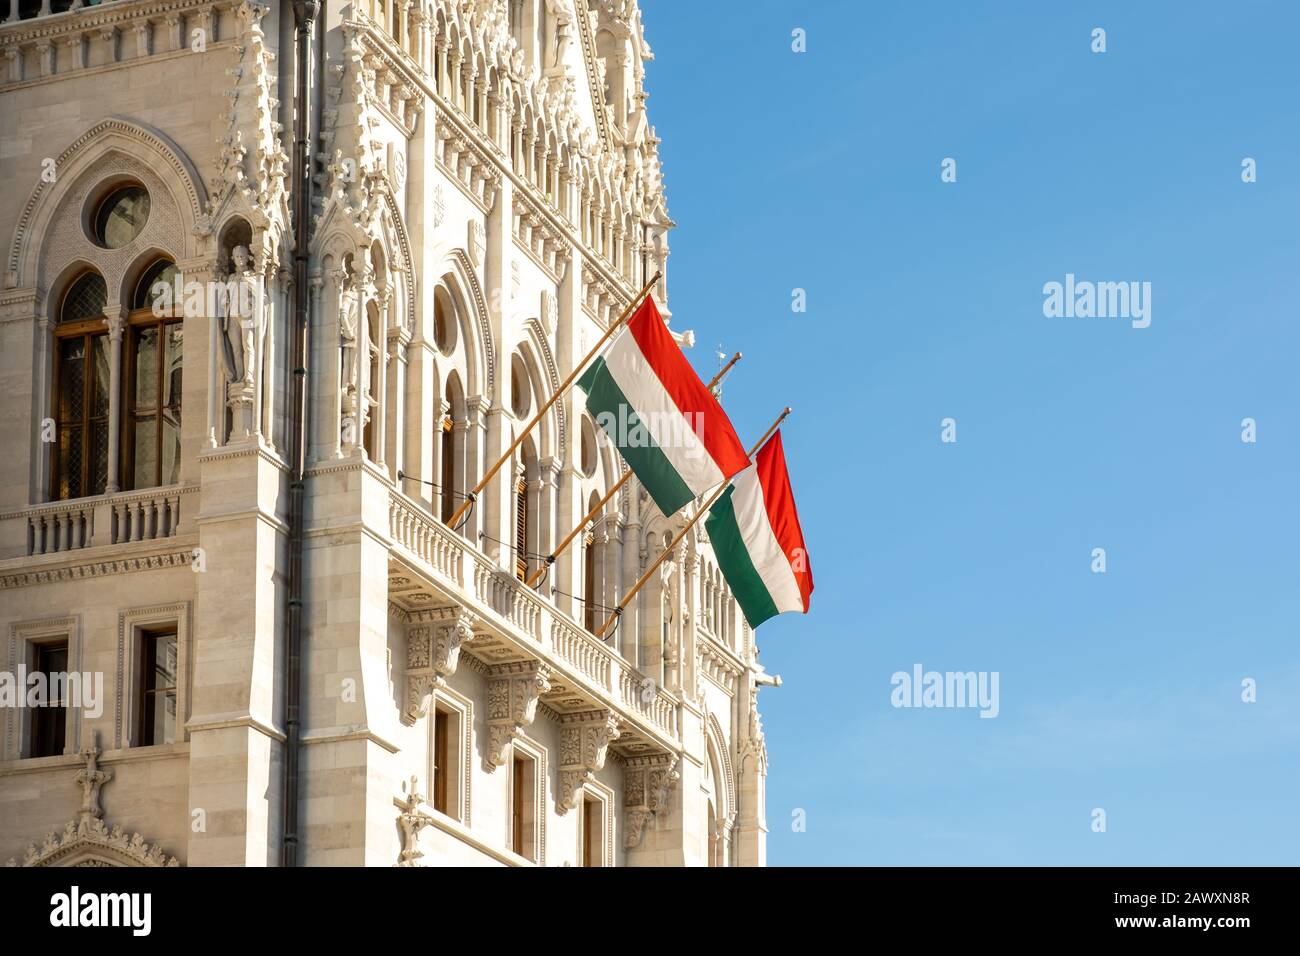 Hungarian flags on the Hungarian Parliament Building or Parliament of Budapest, a landmark and popular tourist destination in Budapest, Hungary Stock Photo